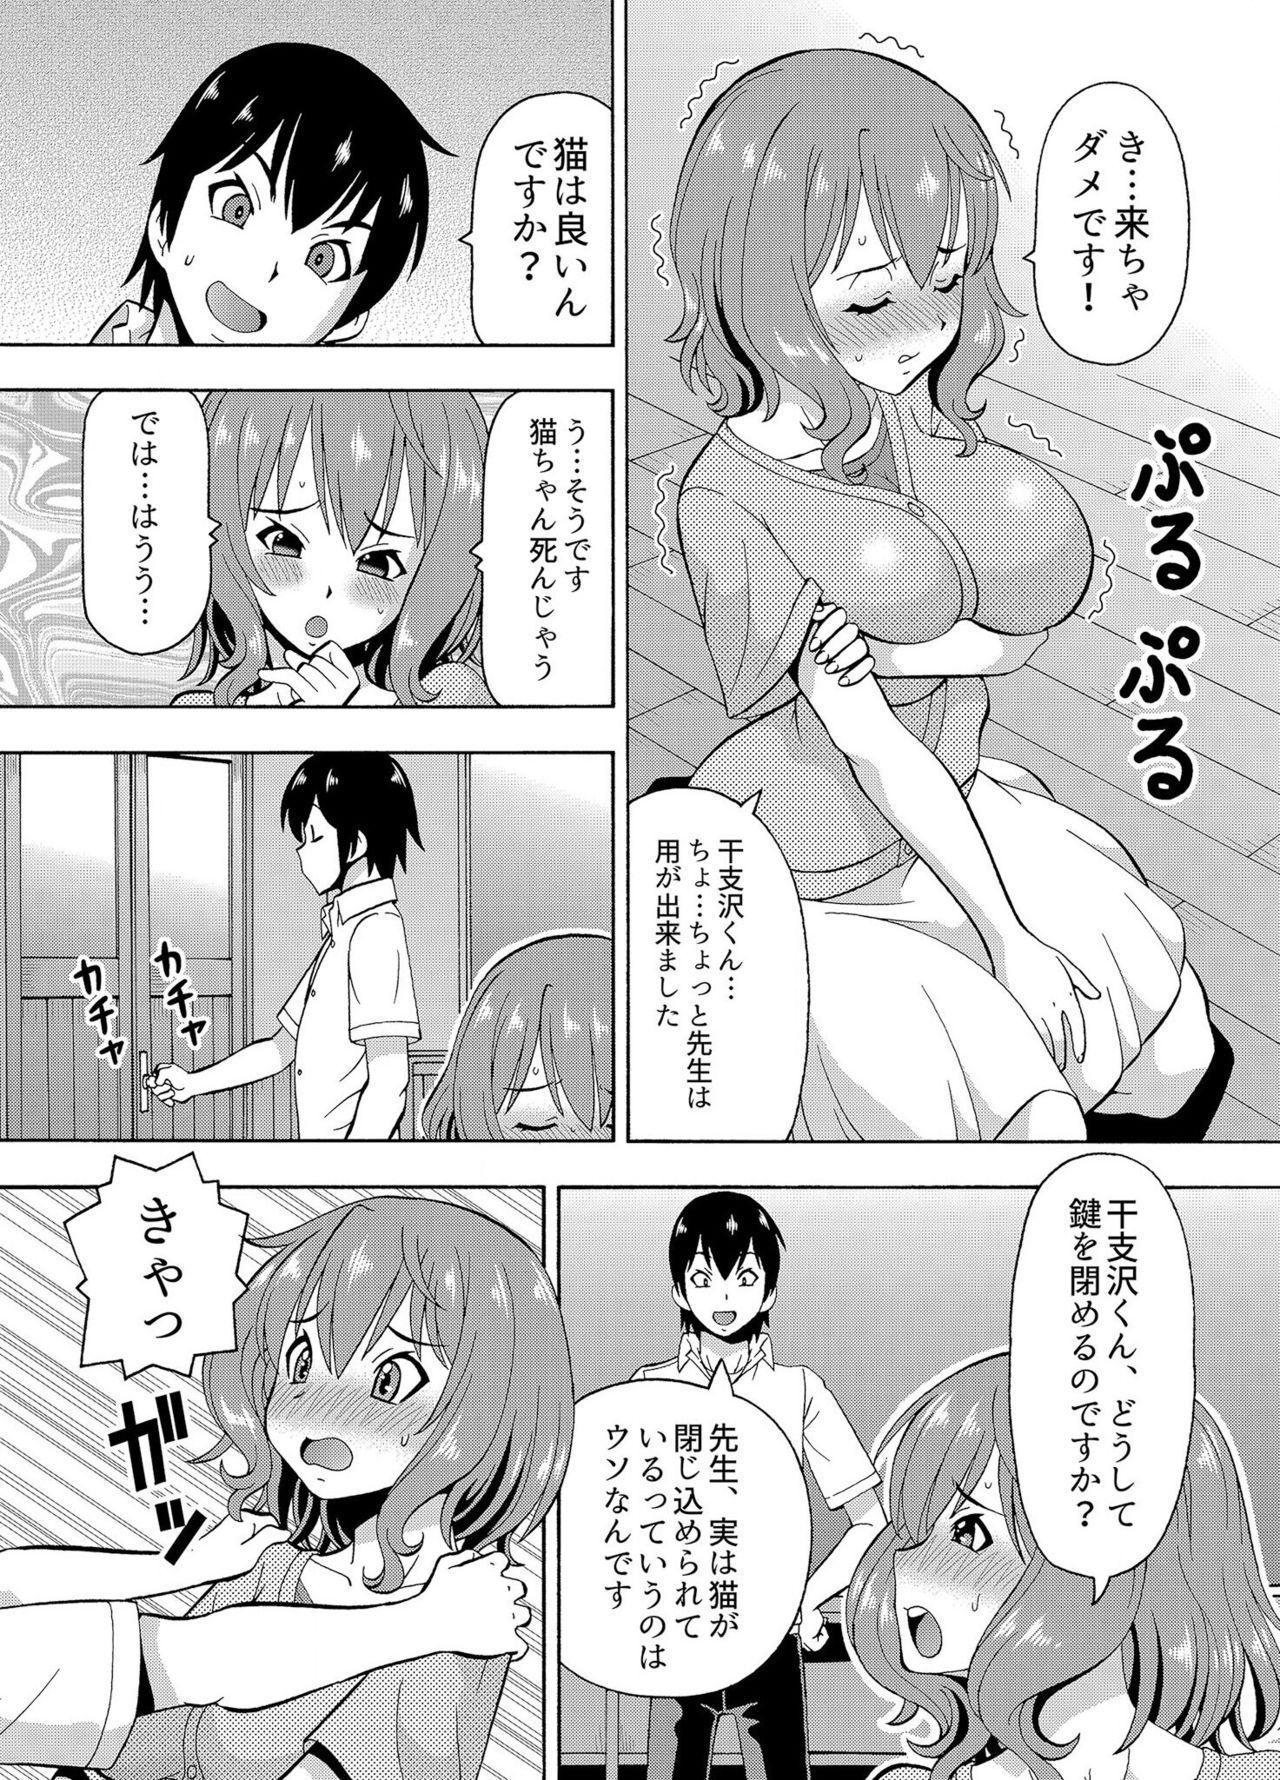 Adorable [薔薇色の日々] パラメータ・リモコン -あの娘のアソコを簡単操作！？-（4） Amature Sex Tapes - Page 9